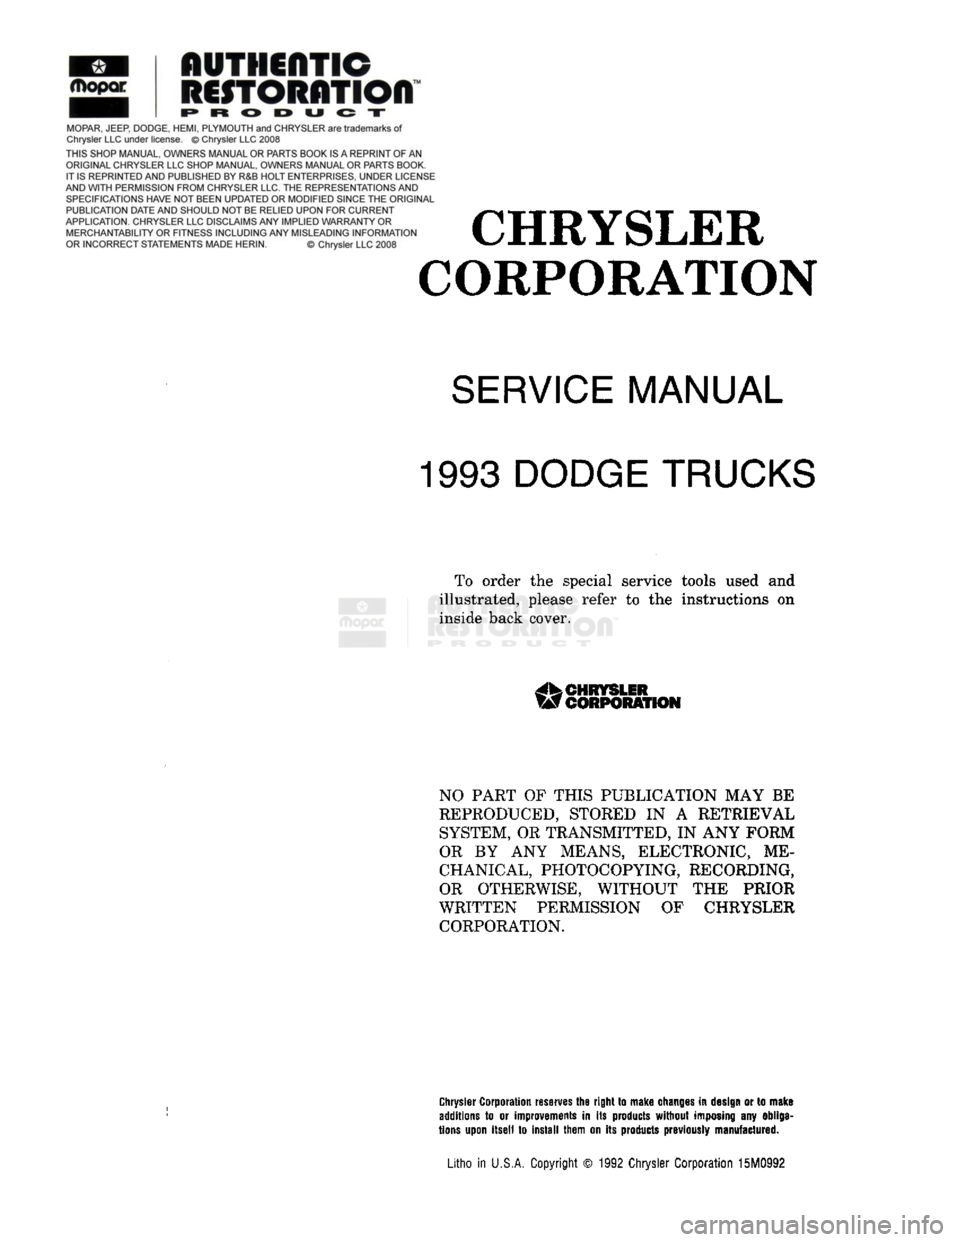 DODGE TRUCK 1993  Service Repair Manual CHRYSLER 
CORPORATION 

SERVICE
 MANUAL 

1993
 DODGE TRUCKS 

To order the special service tools used and 
illustrated, please refer to the instructions on  inside back cover. 

CHRYSLER 

W
 CORPORA